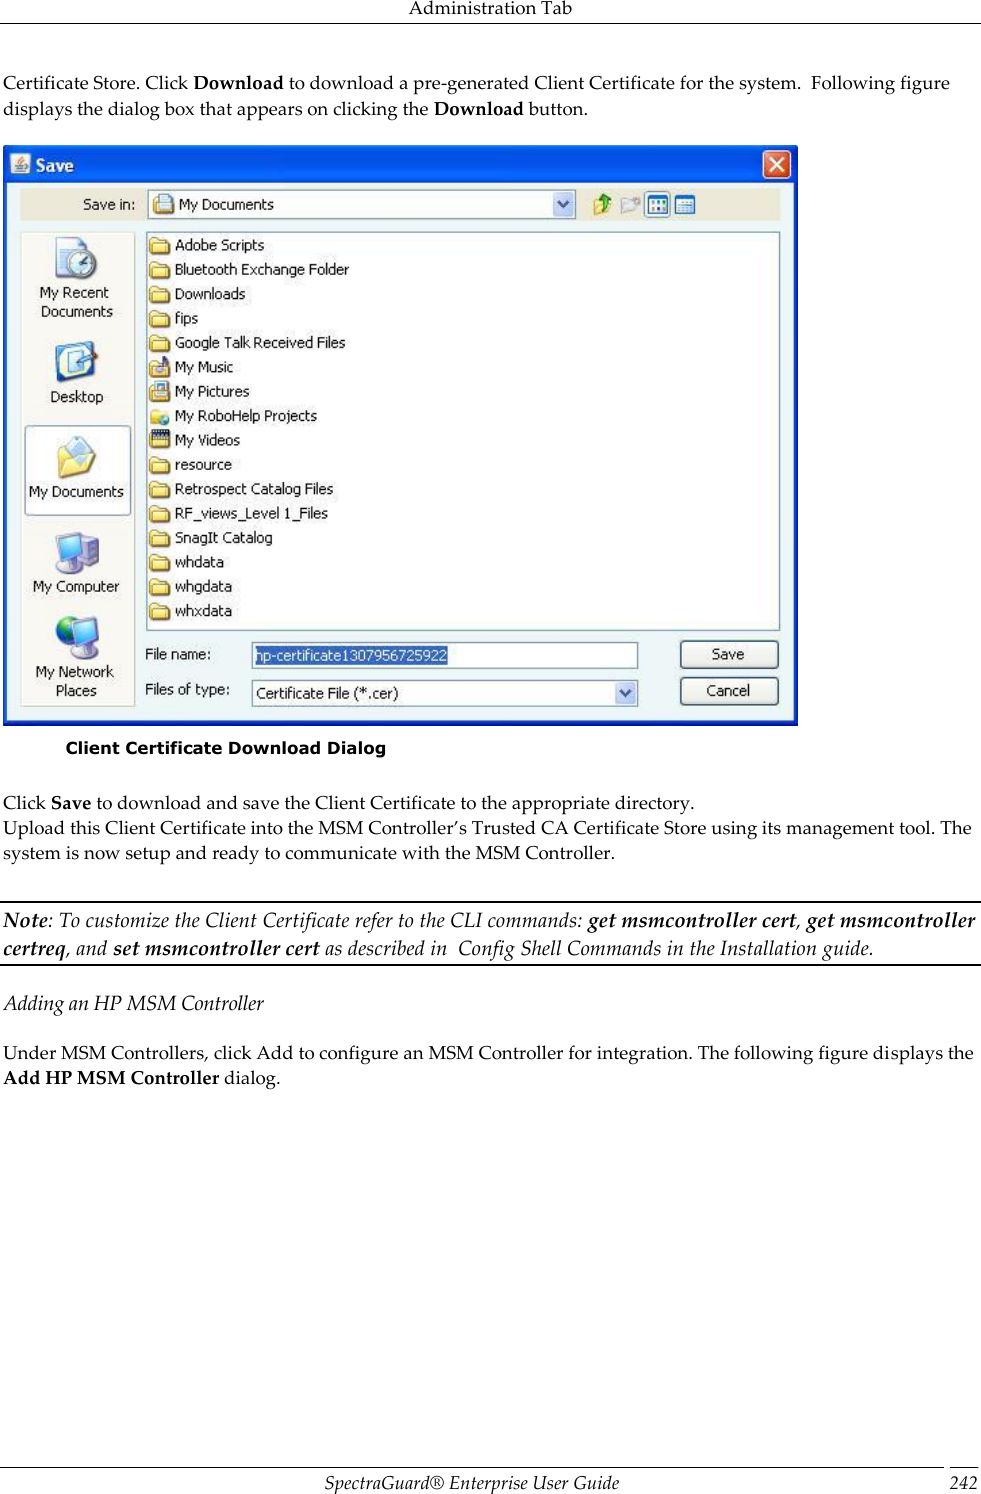 Administration Tab SpectraGuard®  Enterprise User Guide 242 Certificate Store. Click Download to download a pre-generated Client Certificate for the system.  Following figure displays the dialog box that appears on clicking the Download button.    Client Certificate Download Dialog   Click Save to download and save the Client Certificate to the appropriate directory. Upload this Client Certificate into the MSM Controller’s Trusted CA Certificate Store using its management tool. The system is now setup and ready to communicate with the MSM Controller.   Note: To customize the Client Certificate refer to the CLI commands: get msmcontroller cert, get msmcontroller certreq, and set msmcontroller cert as described in  Config Shell Commands in the Installation guide. Adding an HP MSM Controller Under MSM Controllers, click Add to configure an MSM Controller for integration. The following figure displays the Add HP MSM Controller dialog.   